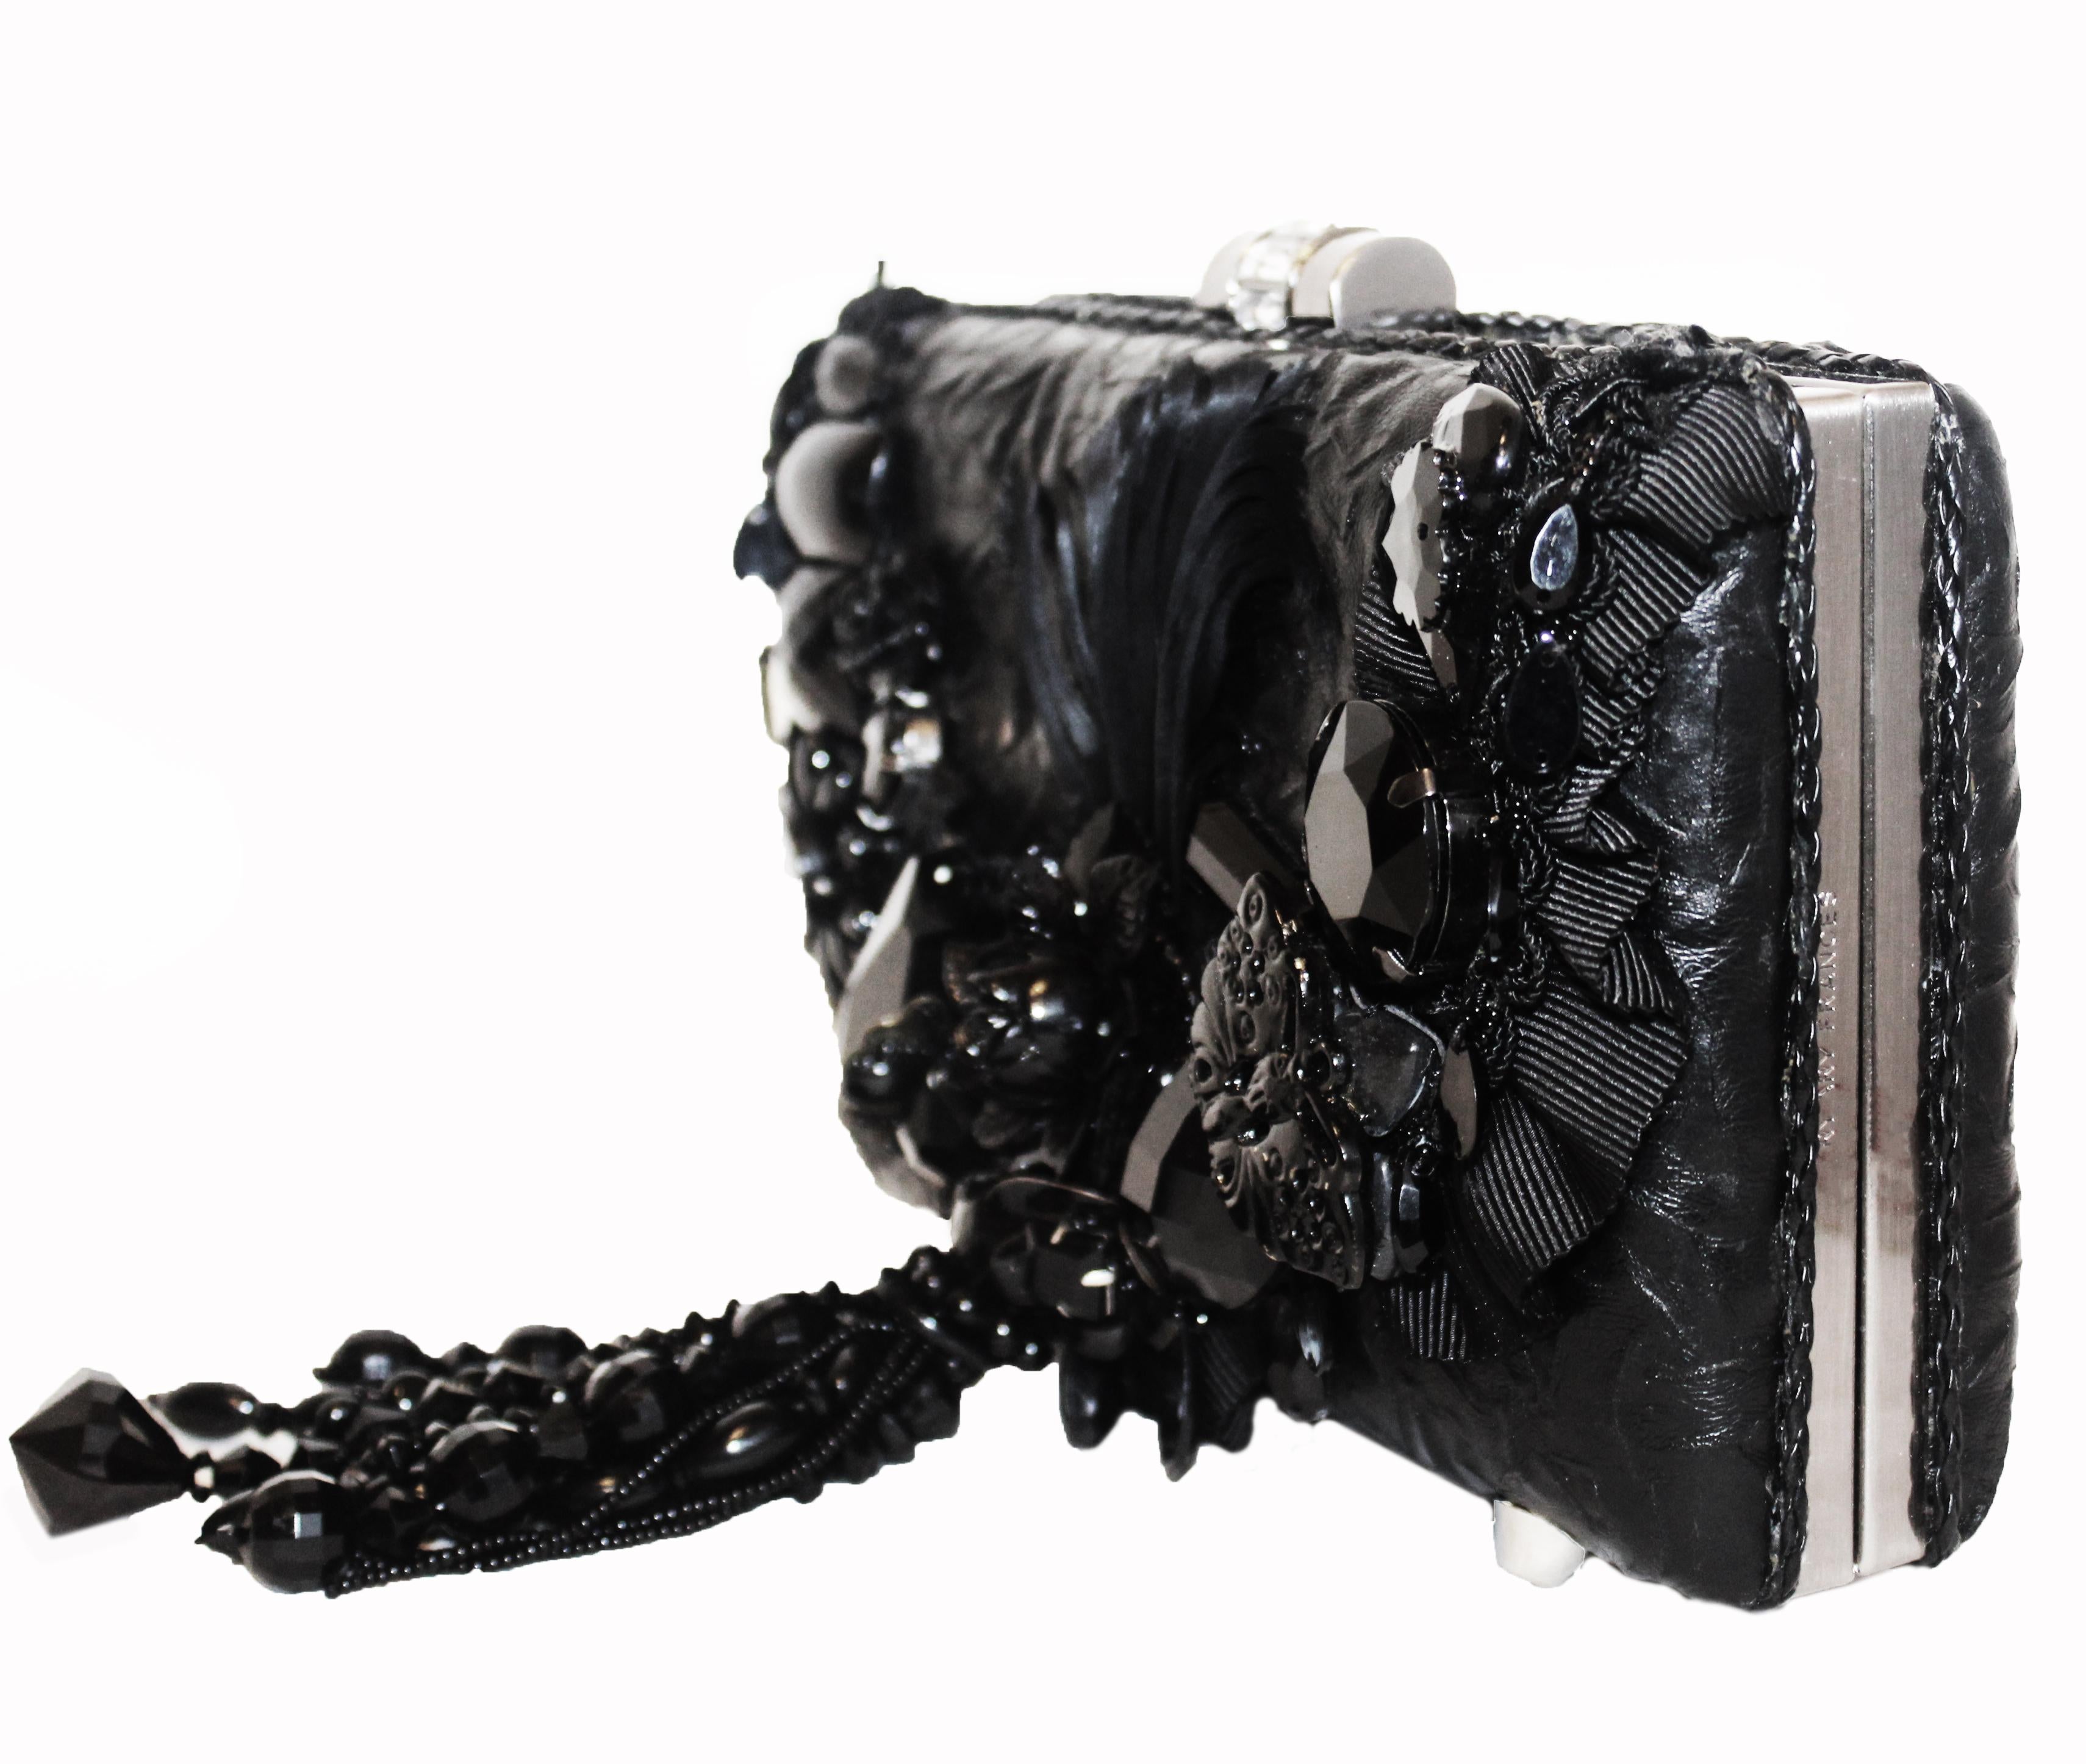 Mary Frances black heavily beaded clutch bag includes a detachable shoulder chain.  This structured leather bag decorated with large plastic, resin and metal ornaments of flowers and butterflies opens to a center compartment lined in black raw silk